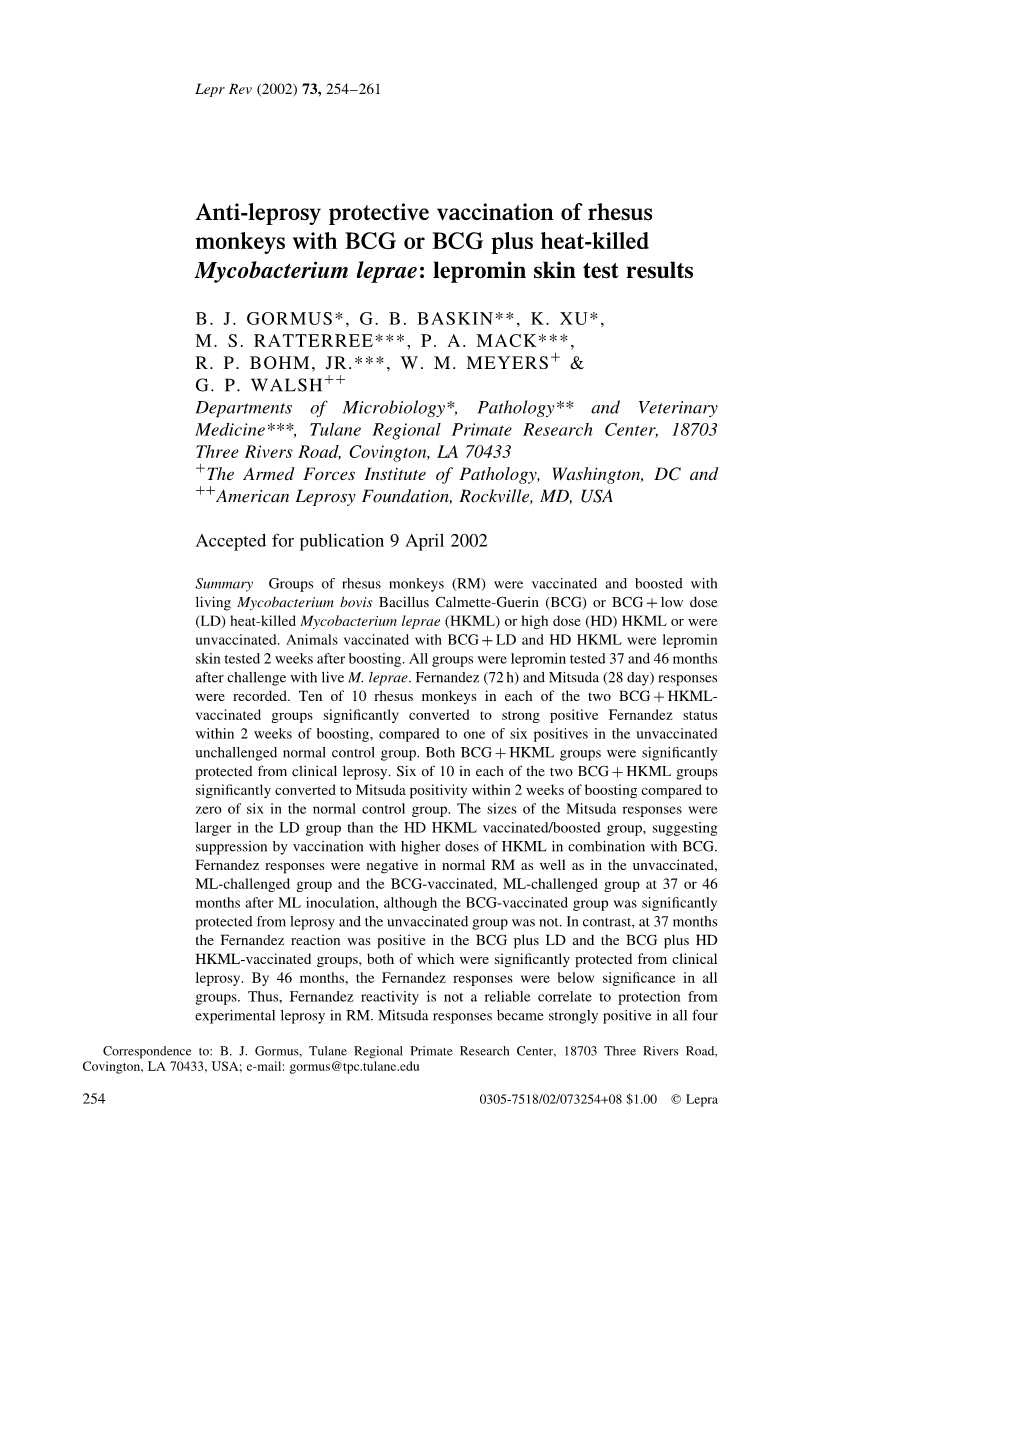 Anti-Leprosy Protective Vaccination of Rhesus Monkeys with BCG Or BCG Plus Heat-Killed Mycobacterium Leprae: Lepromin Skin Test Results